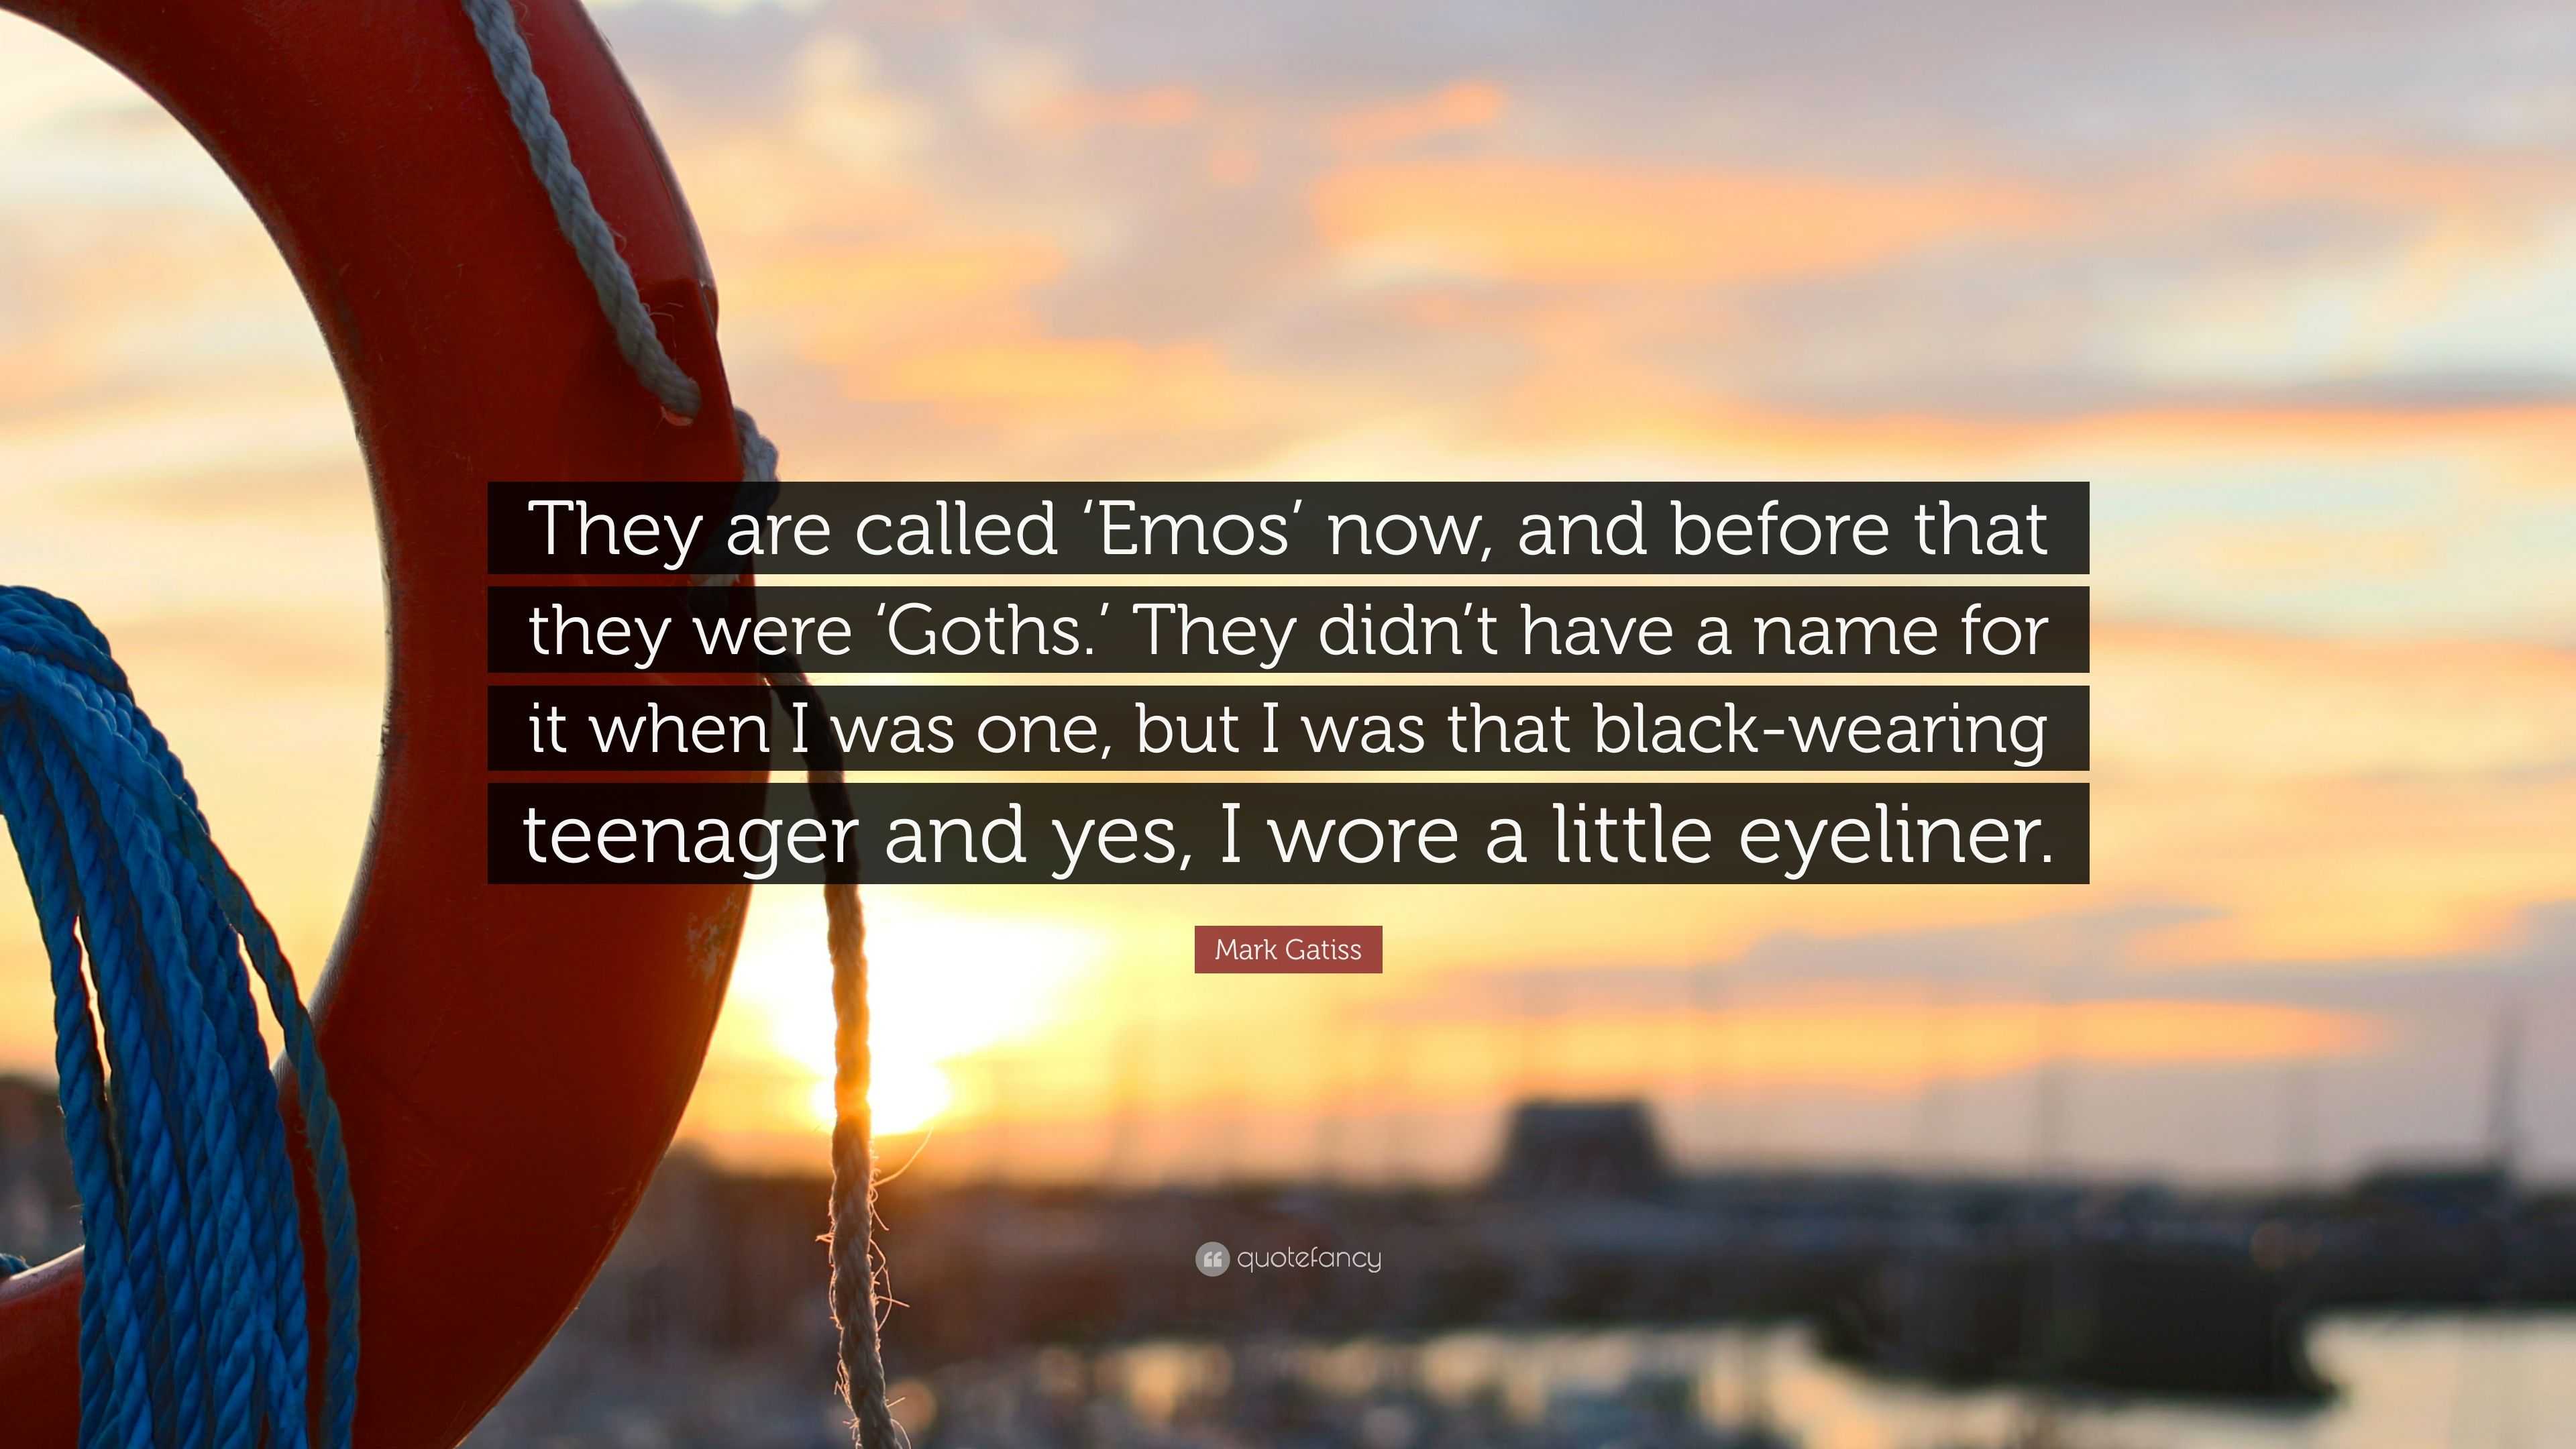 What are Emos called now?